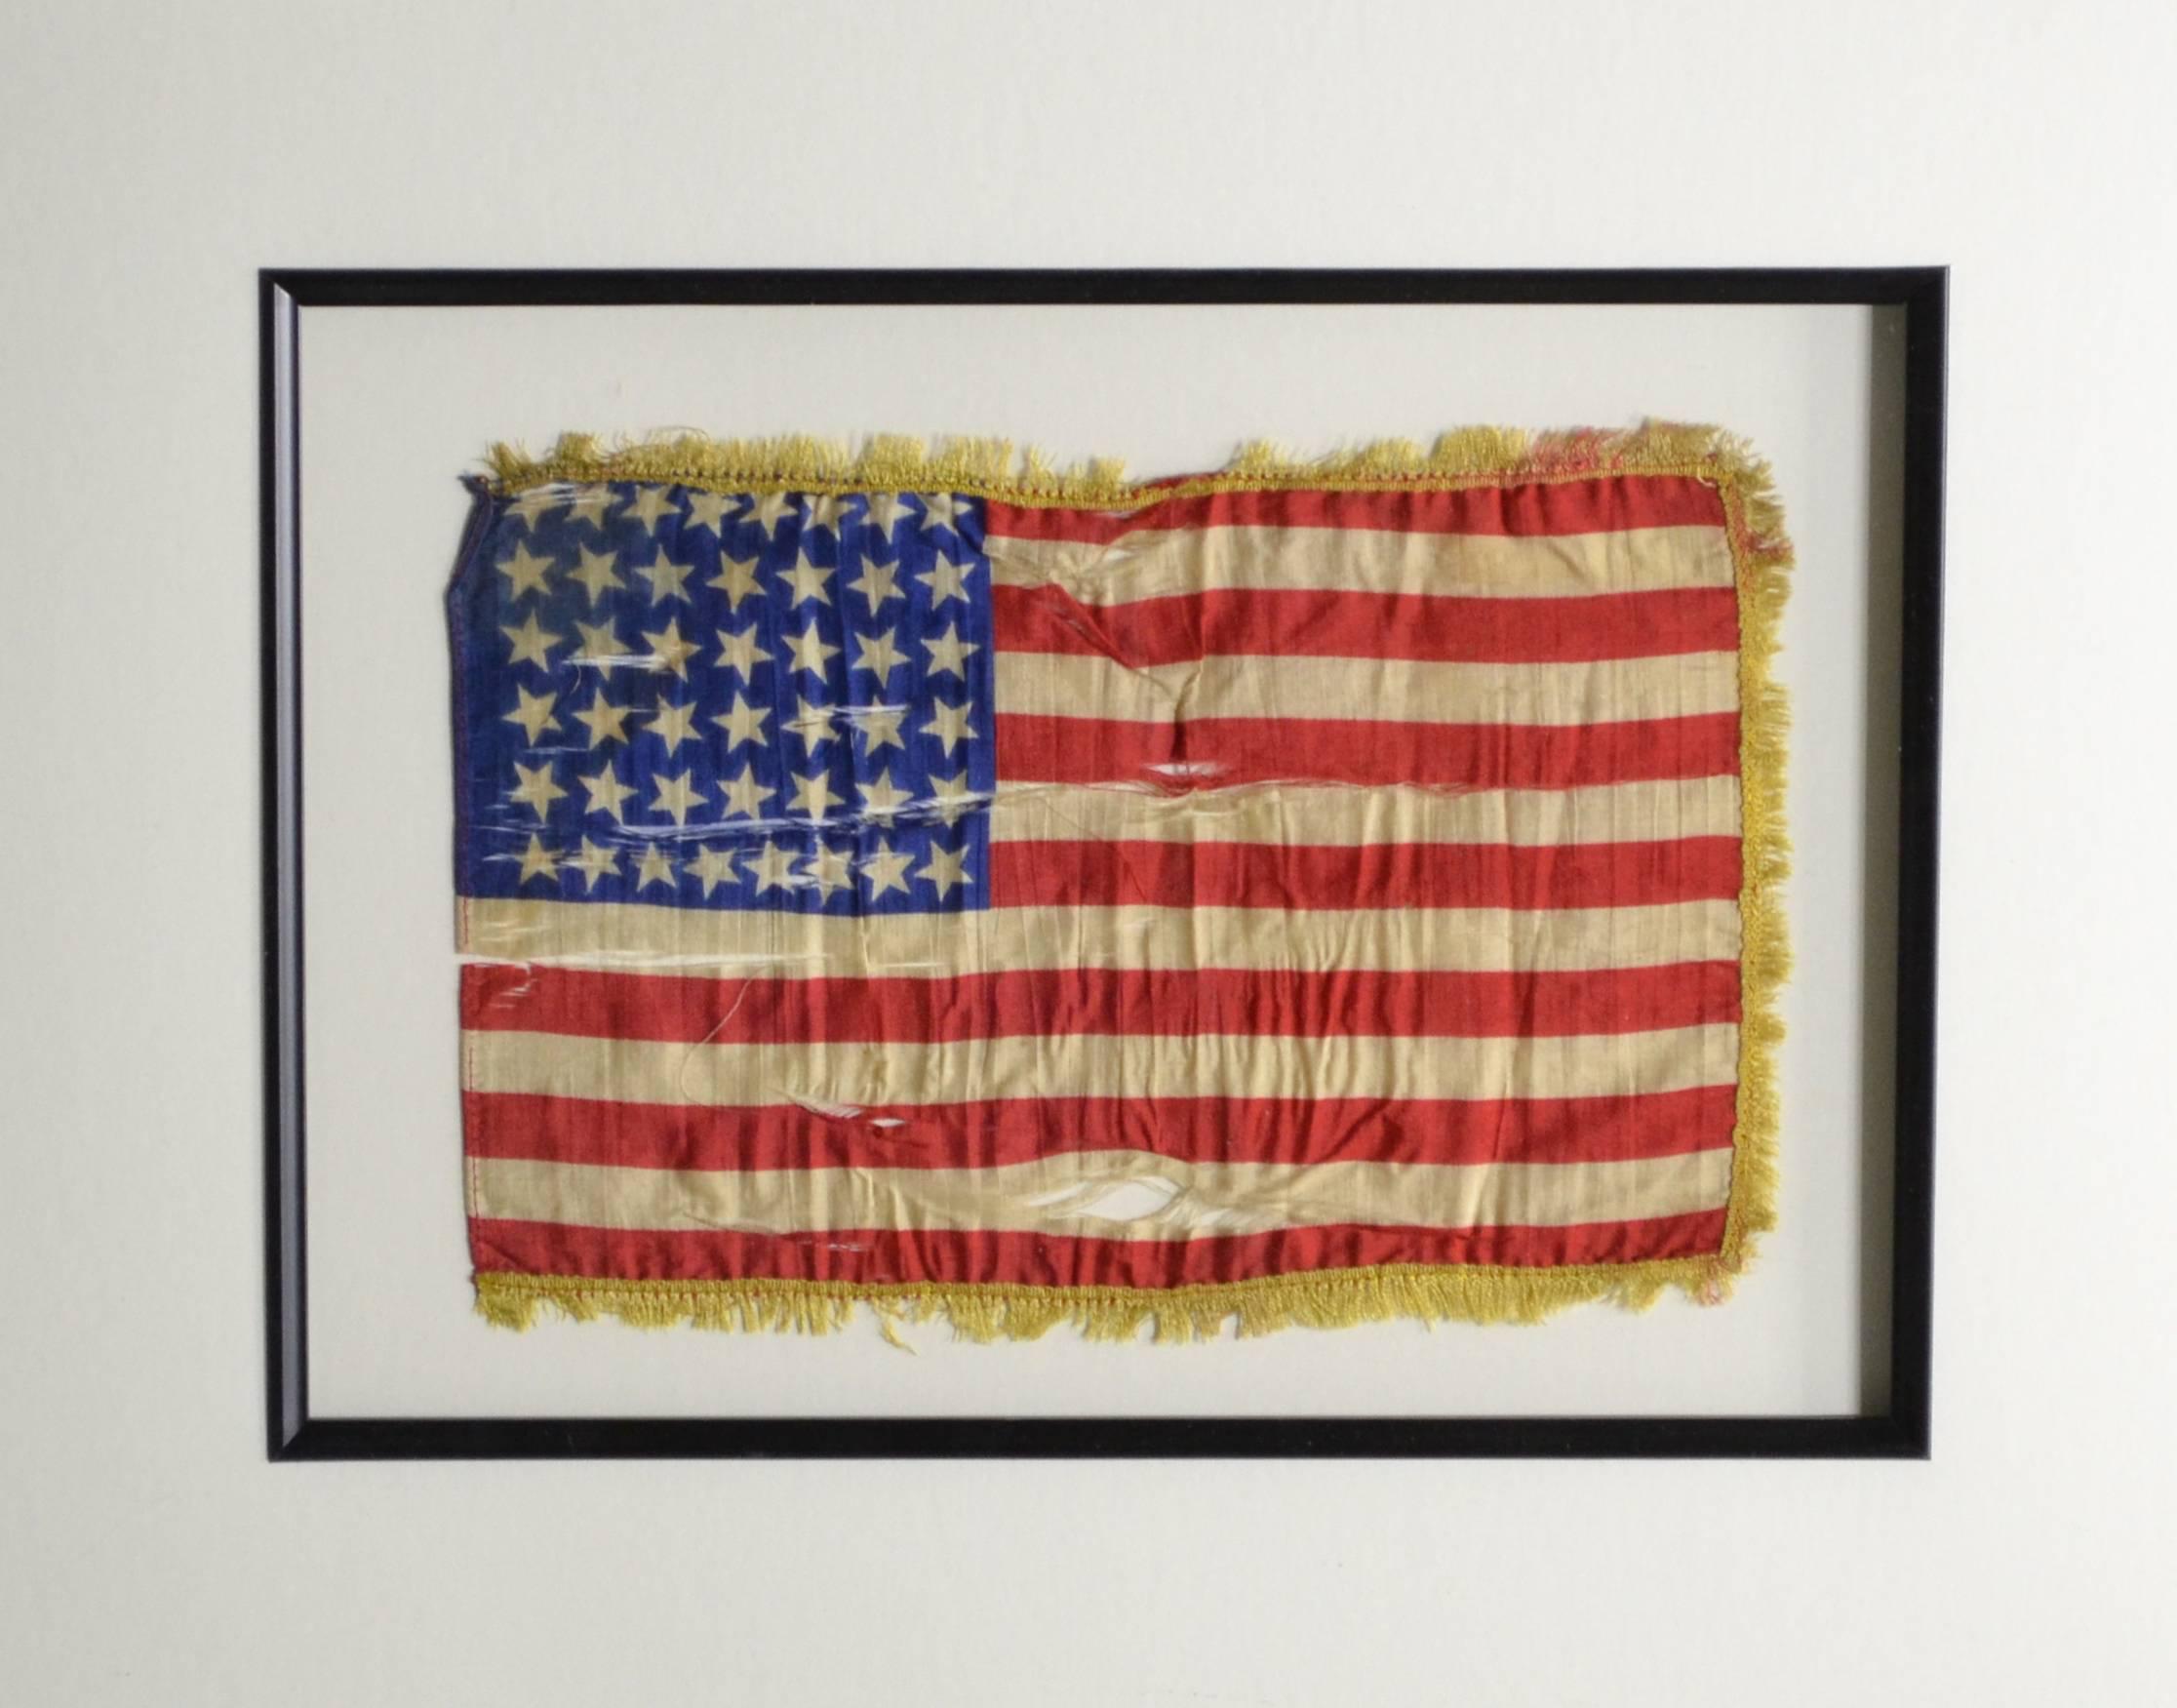 Very unique authentic antique 44 star American flag. Made of silk with fringe sewn attached. The colors are still very strong. The silk has split in several places but the flag has been framed by conservation methods so it’s safe for another100